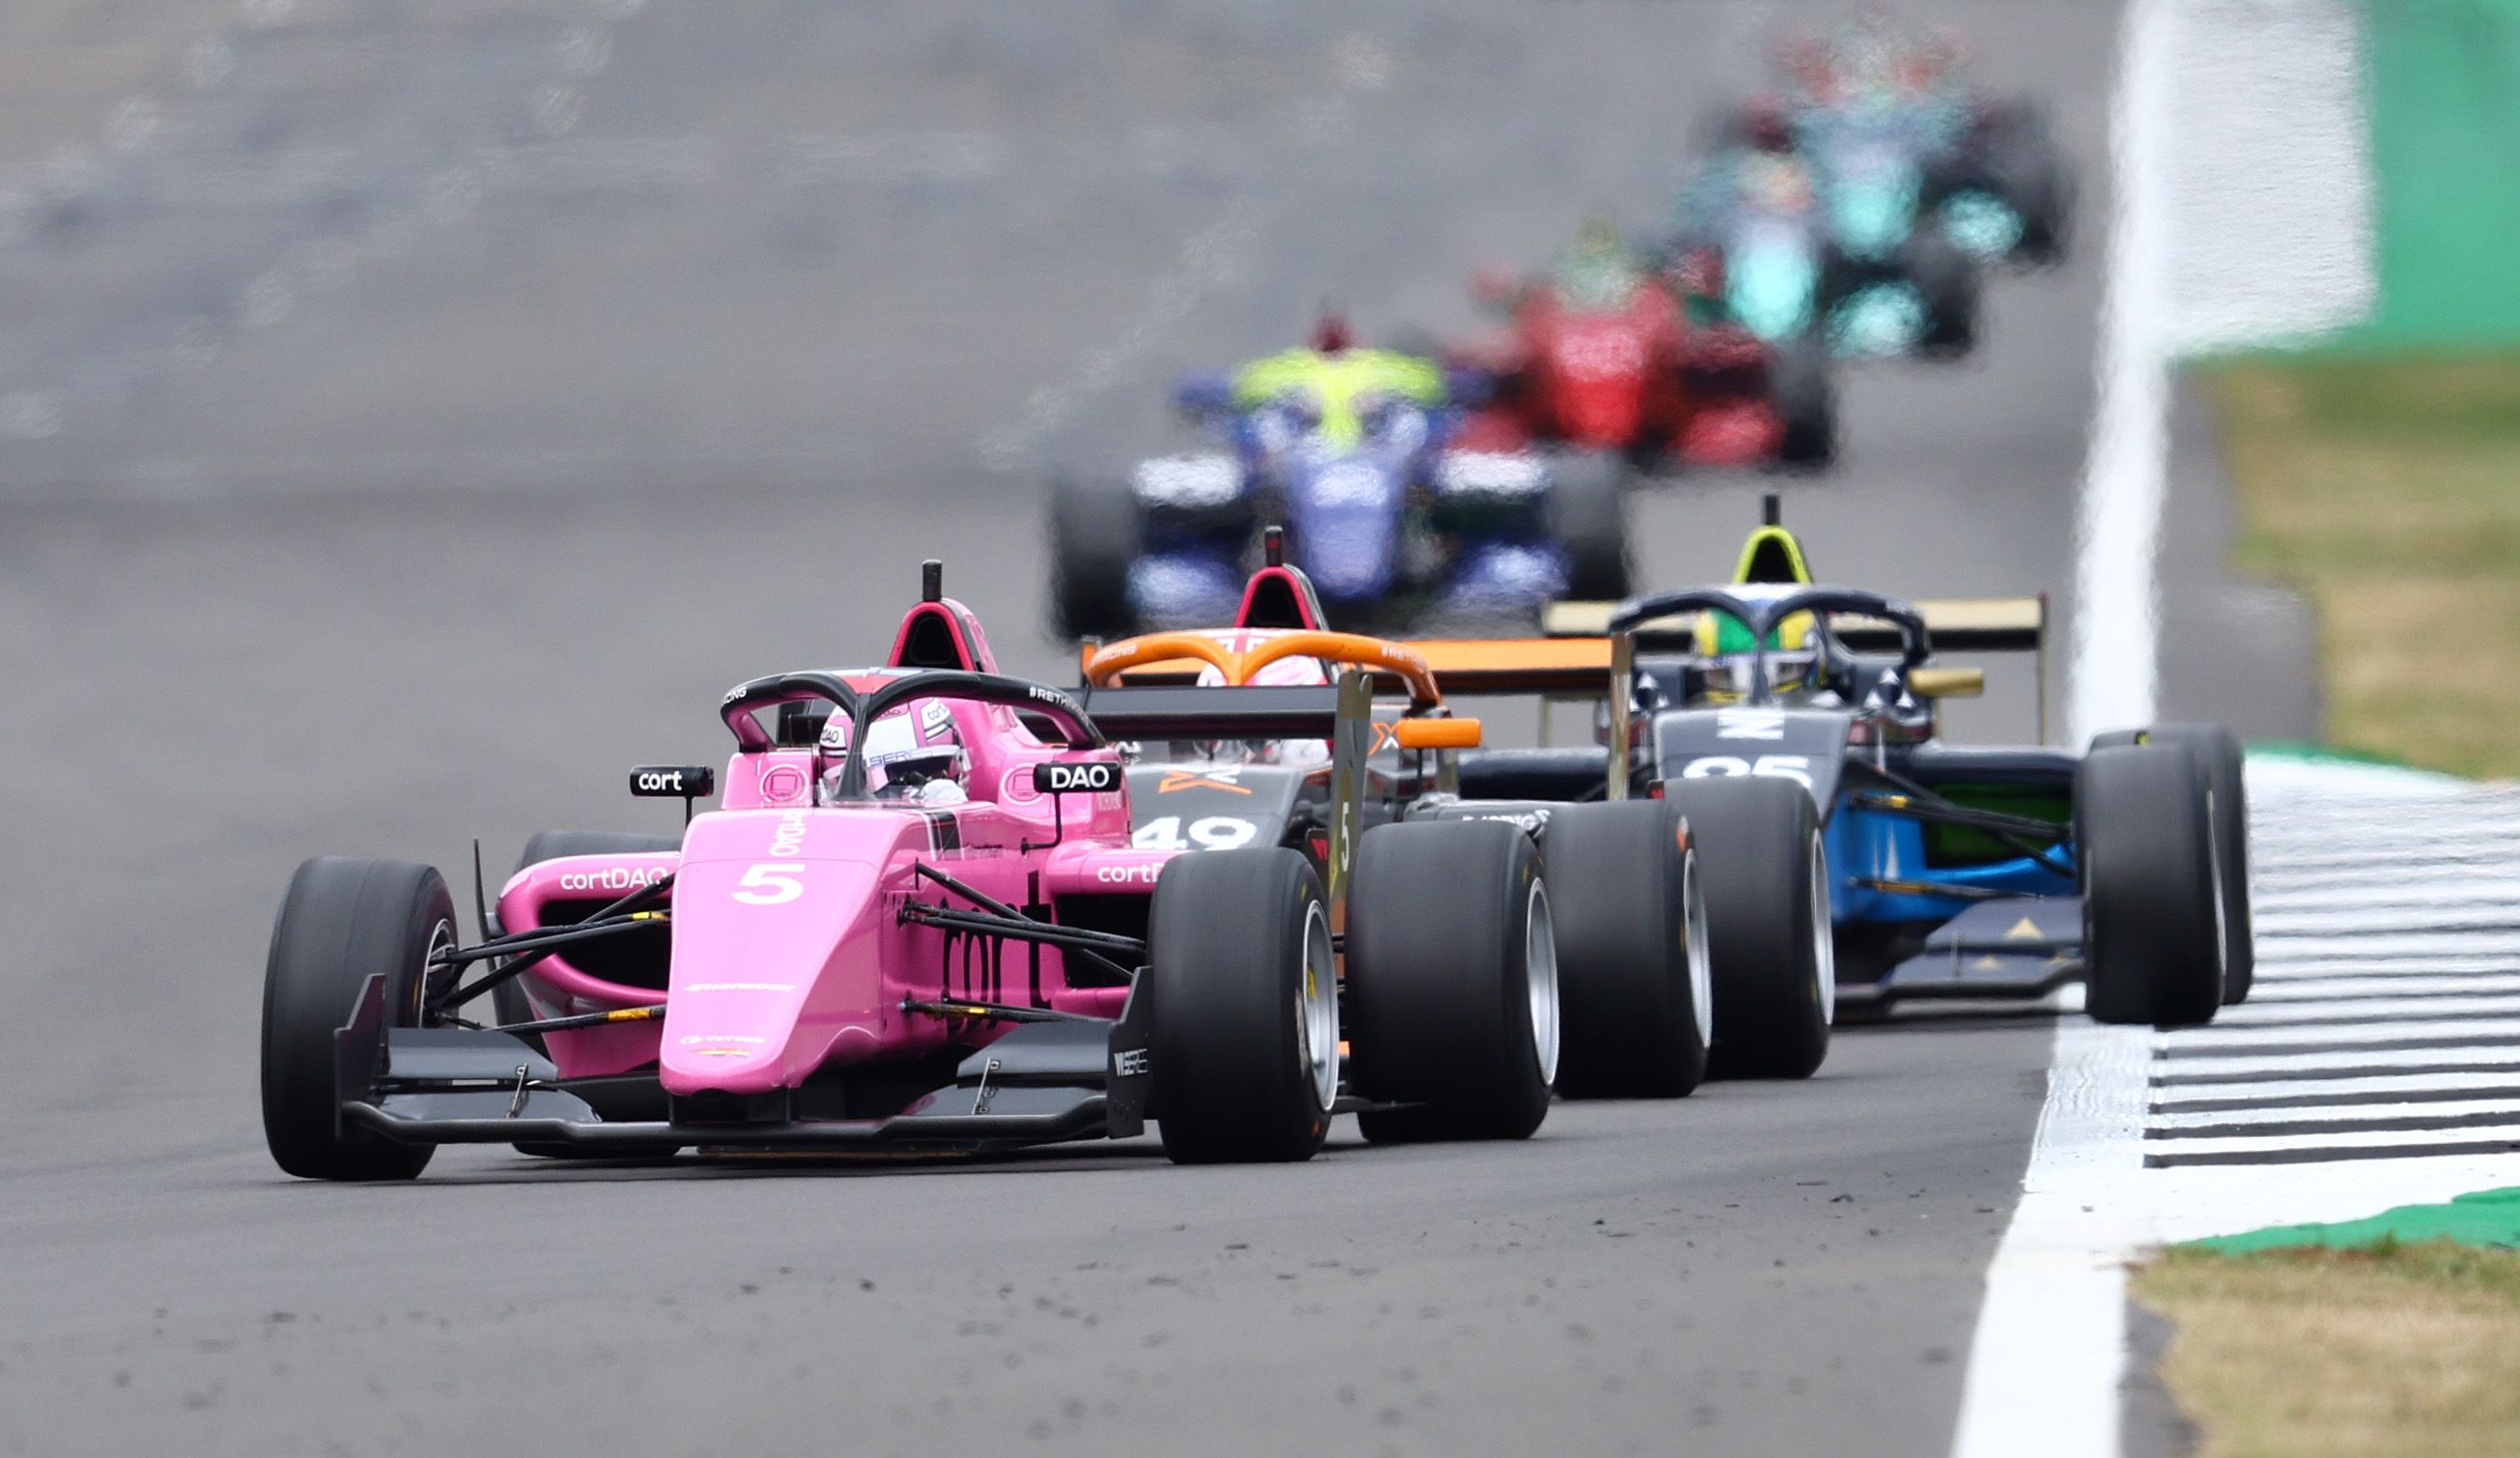 EXCLUSIVE: Leading female racers call for rethink of 'fishbowl' F1 feeder category